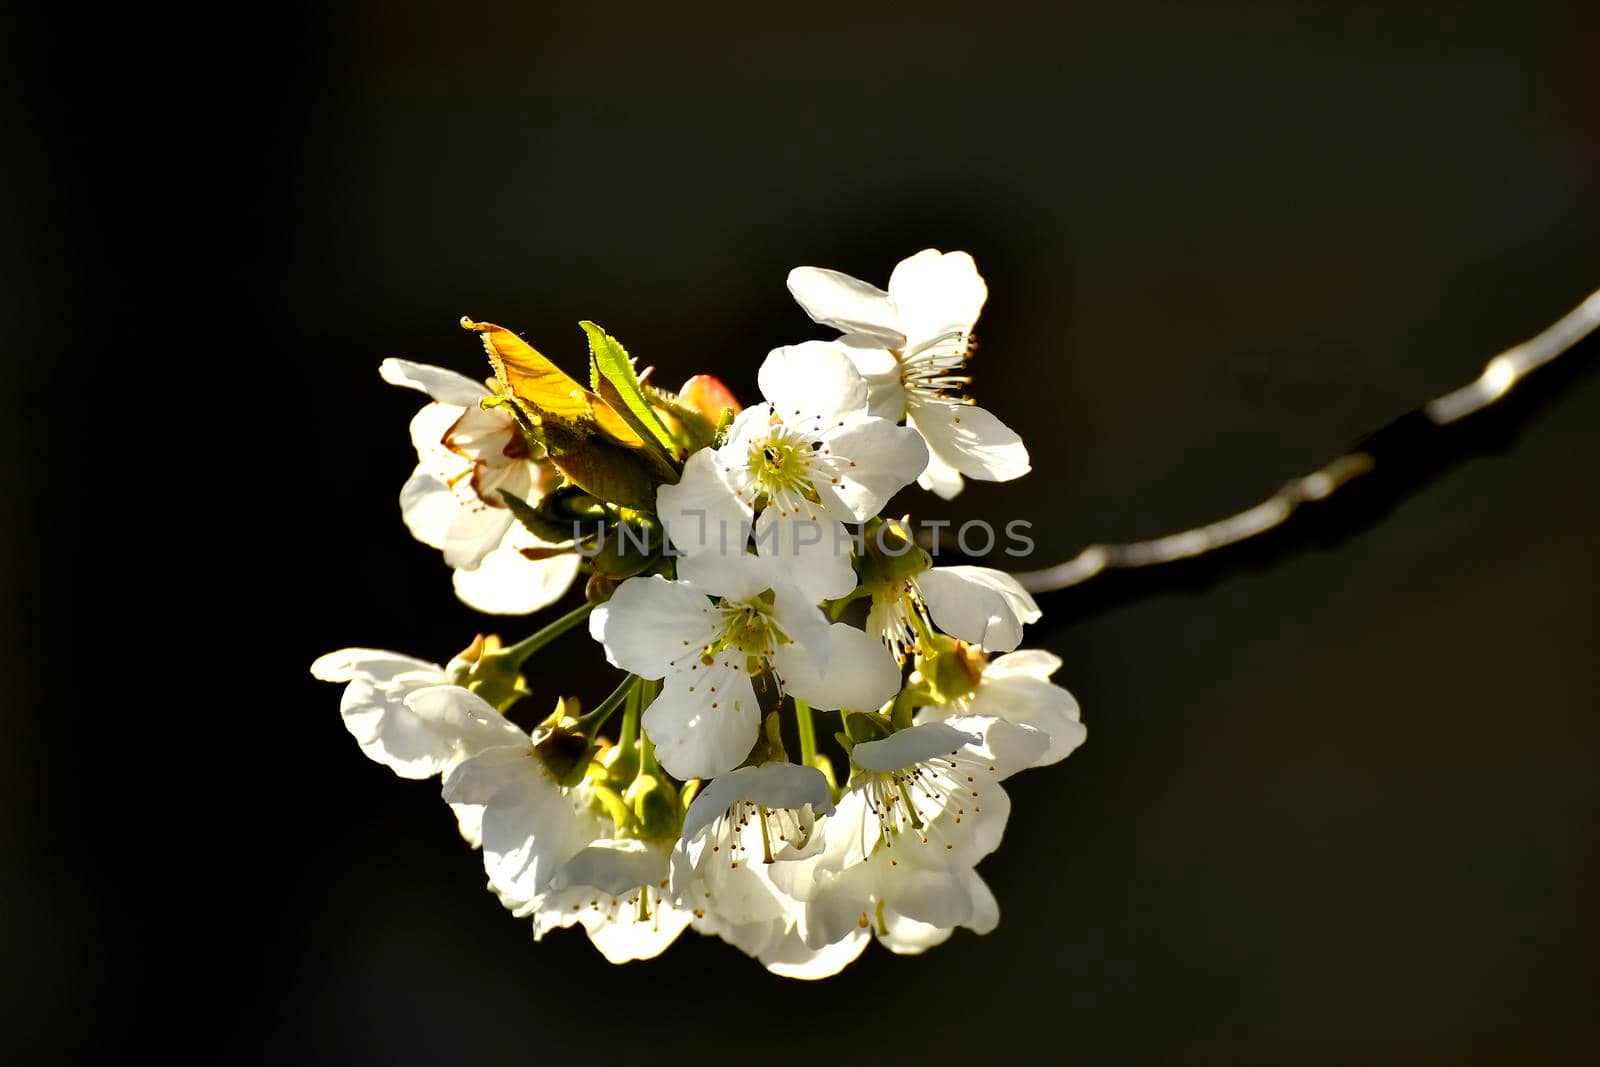 Wild cherry blossom in spring in backlit Germany